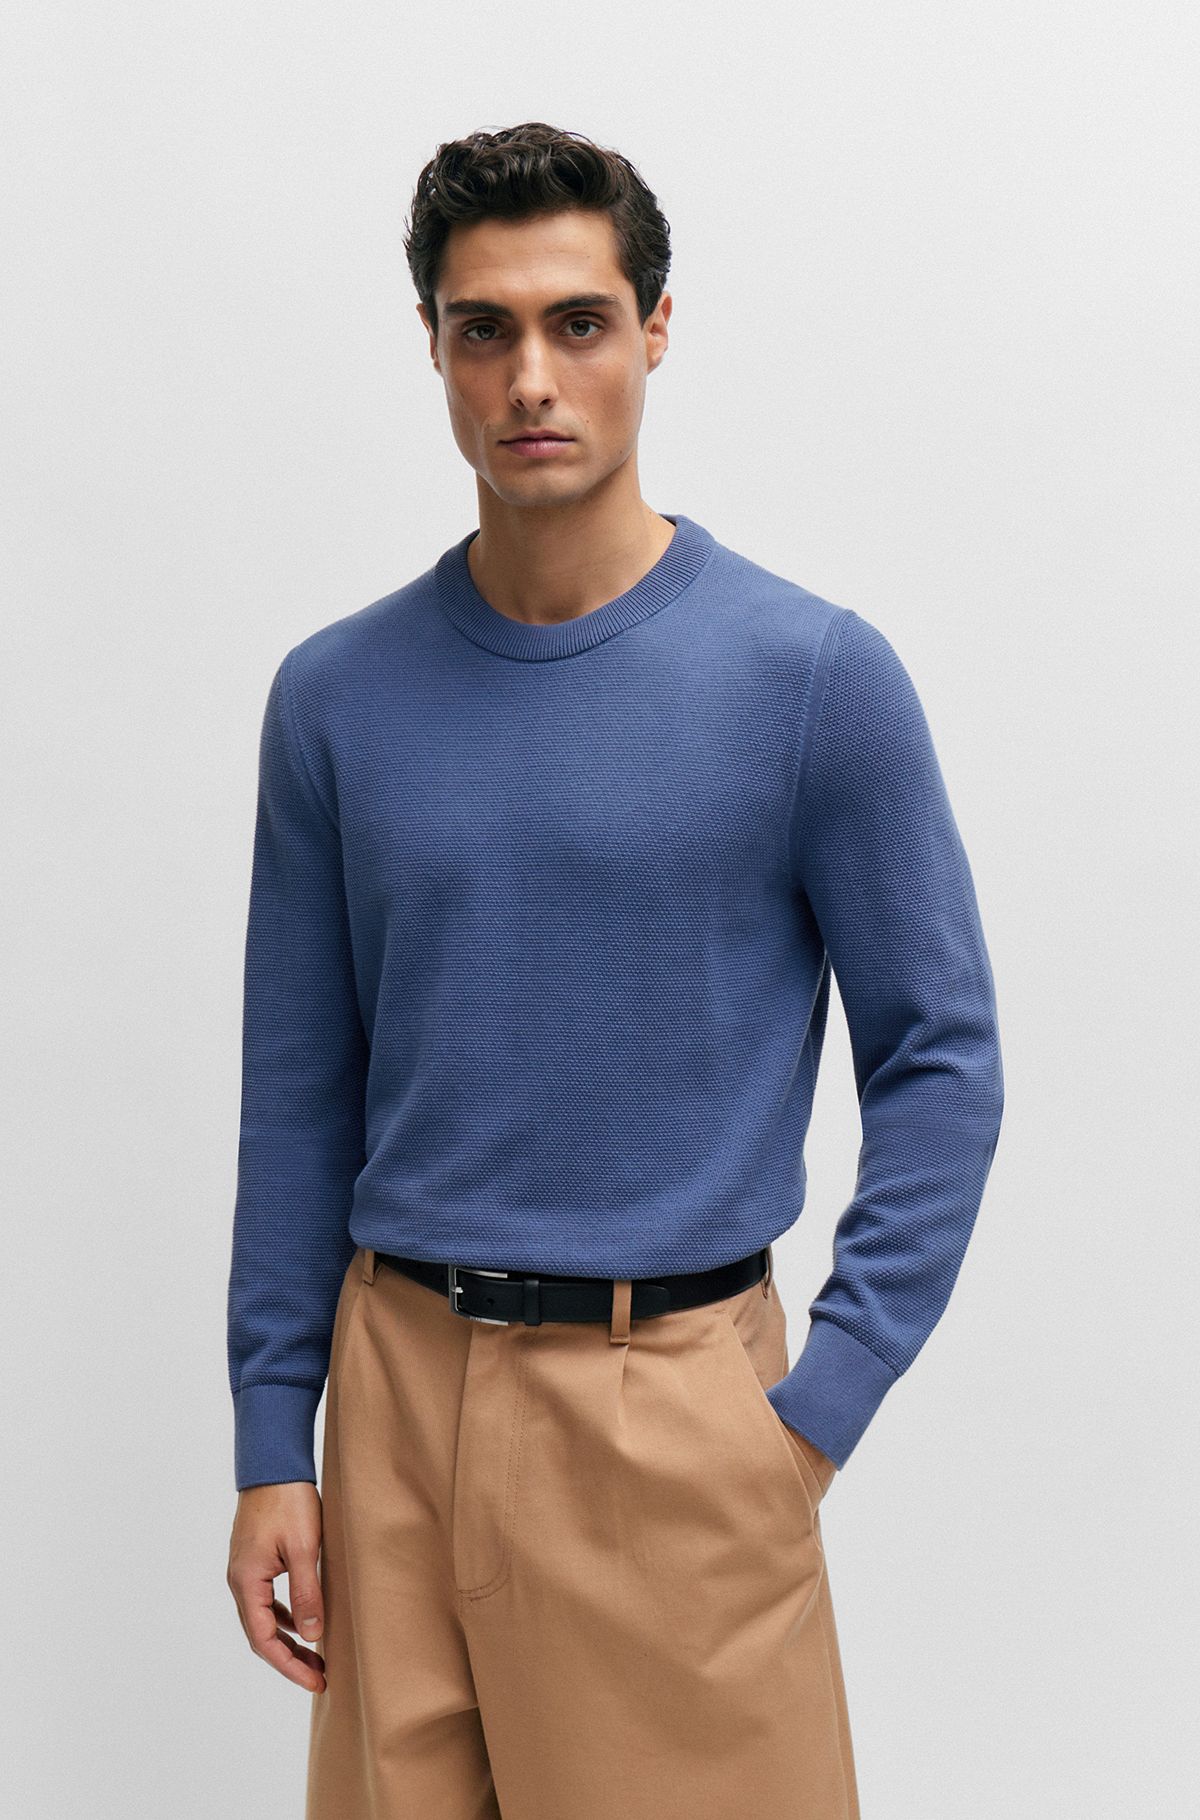 Micro-structured crew-neck sweater in cotton, Blue